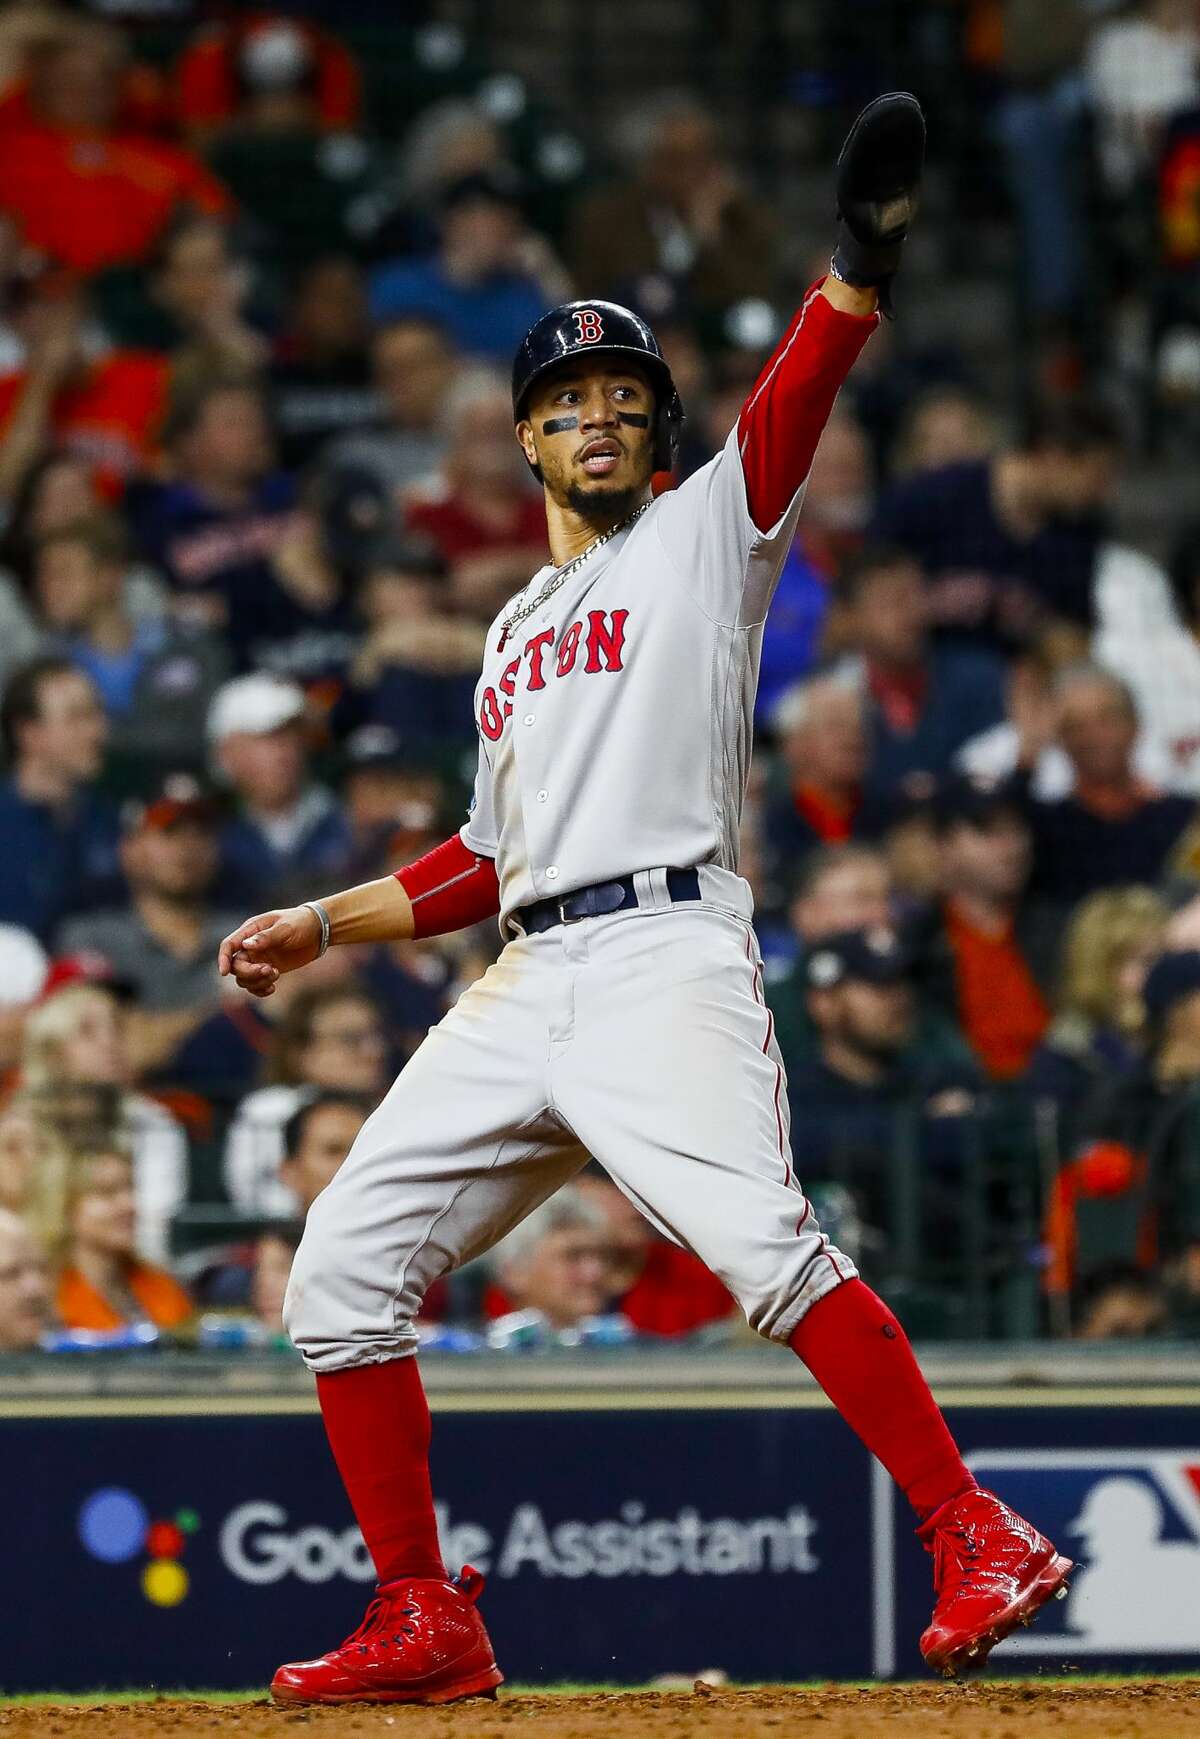 Boston Red Sox Mookie Betts (50) crosses home plate after an RBI single by Boston Red Sox J.D. Martinez (28) during the eighth inning of Game 4 of the American League Championship Series at Minute Maid Park on Wednesday, Oct. 17, 2018, in Houston.